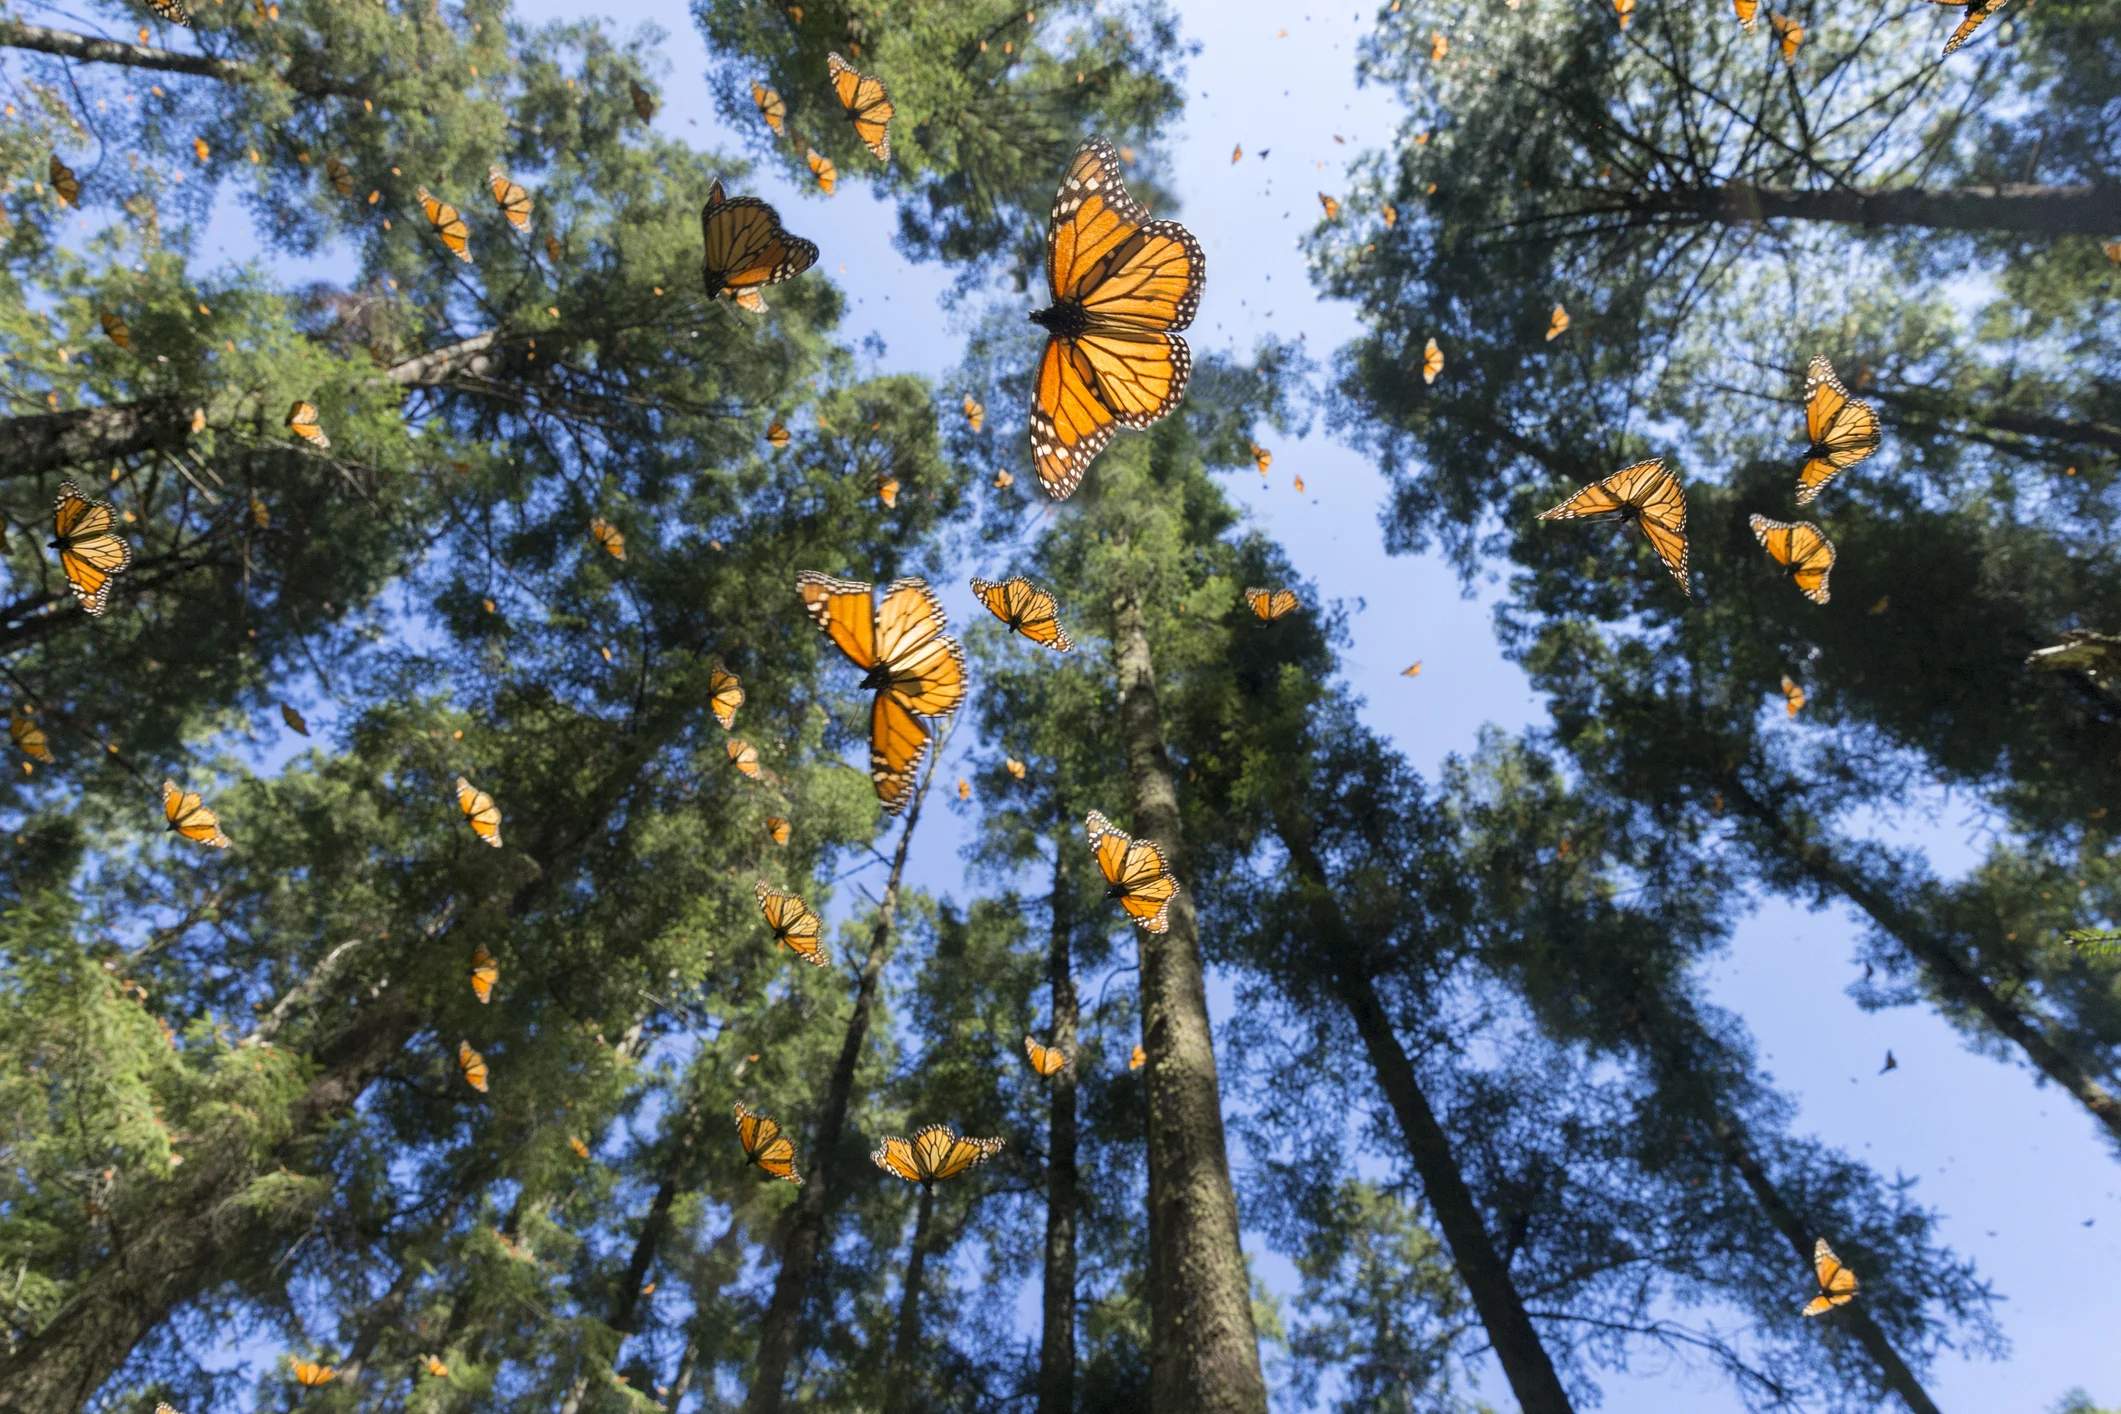 monarch butterfly (Sylvain Cordier/ Getty Images)